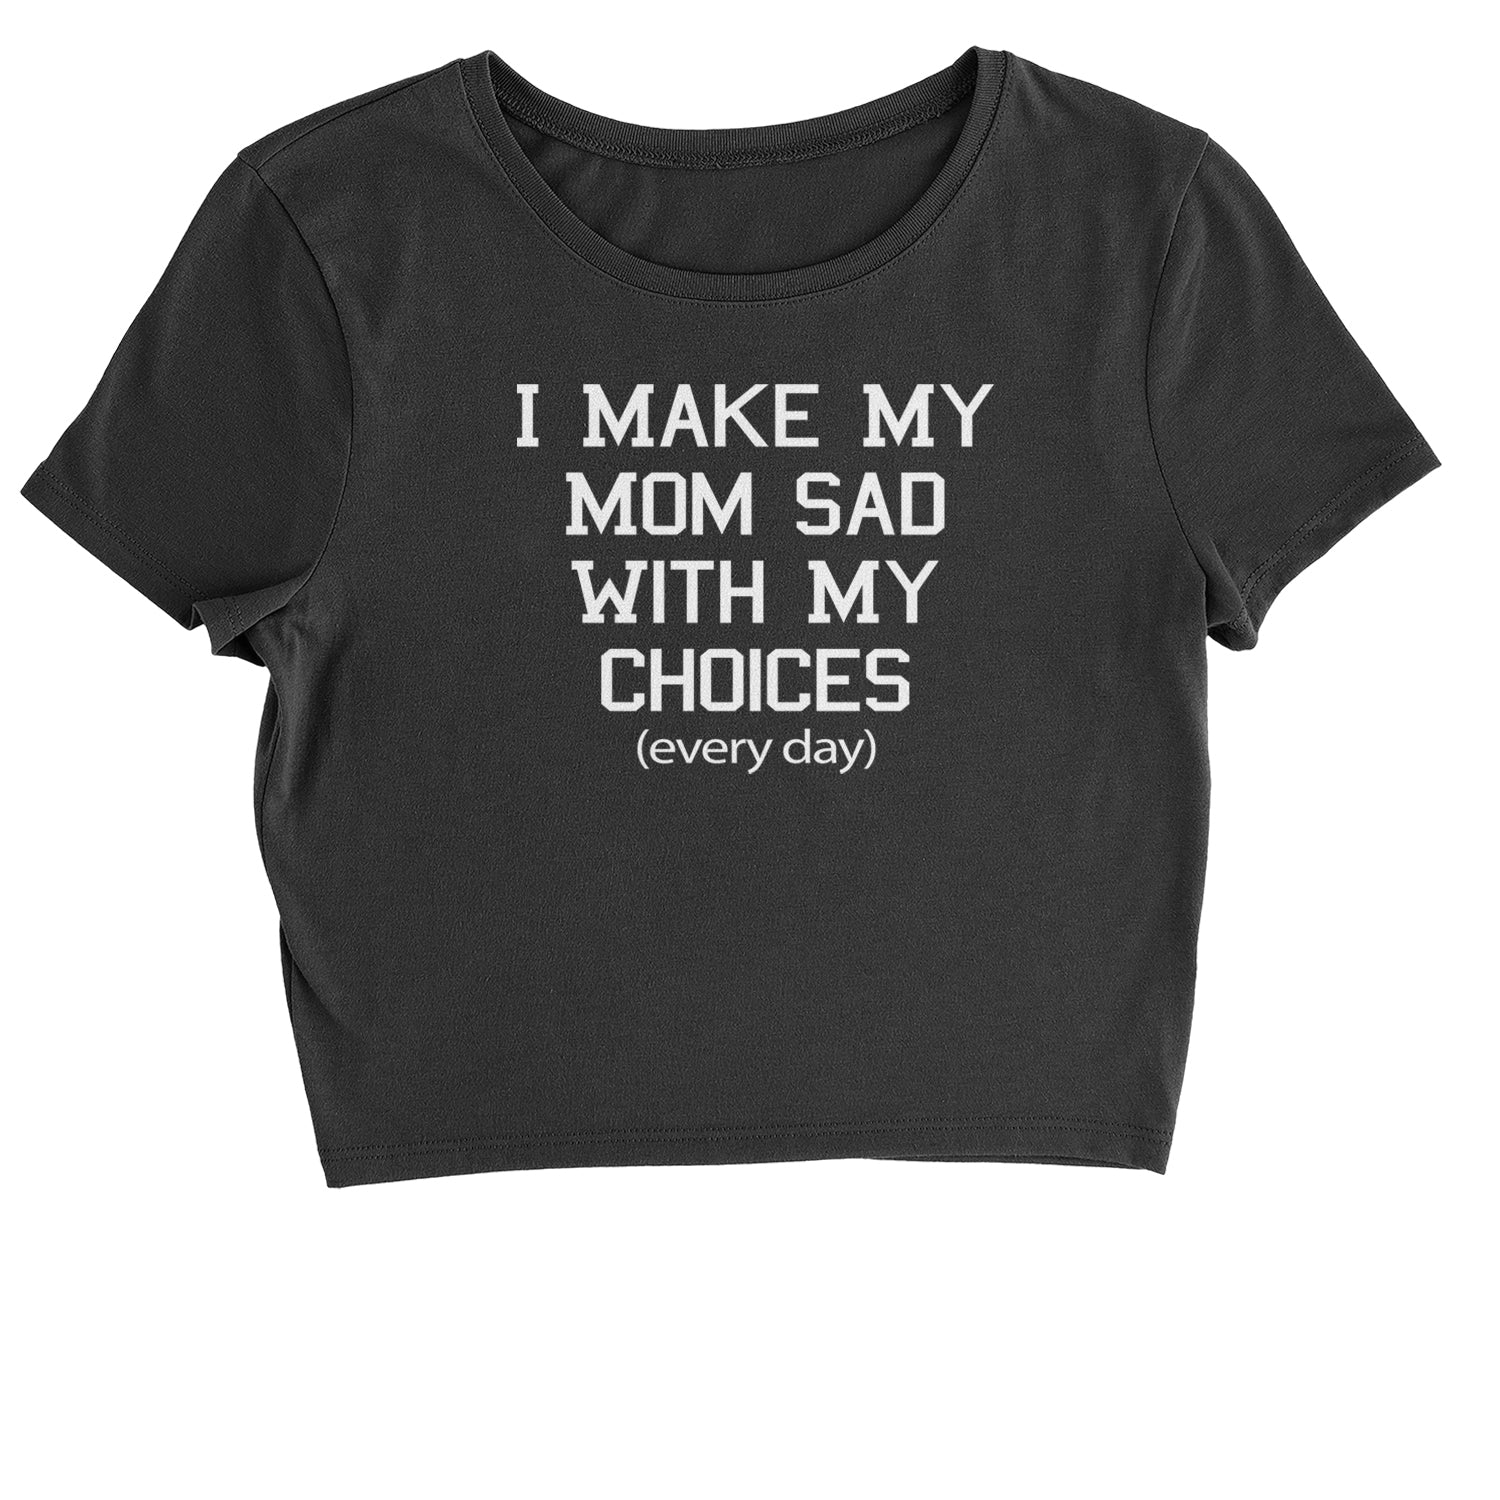 I Make My Mom Sad With My Choices Every Day Cropped T-Shirt funny, ironic, meme by Expression Tees